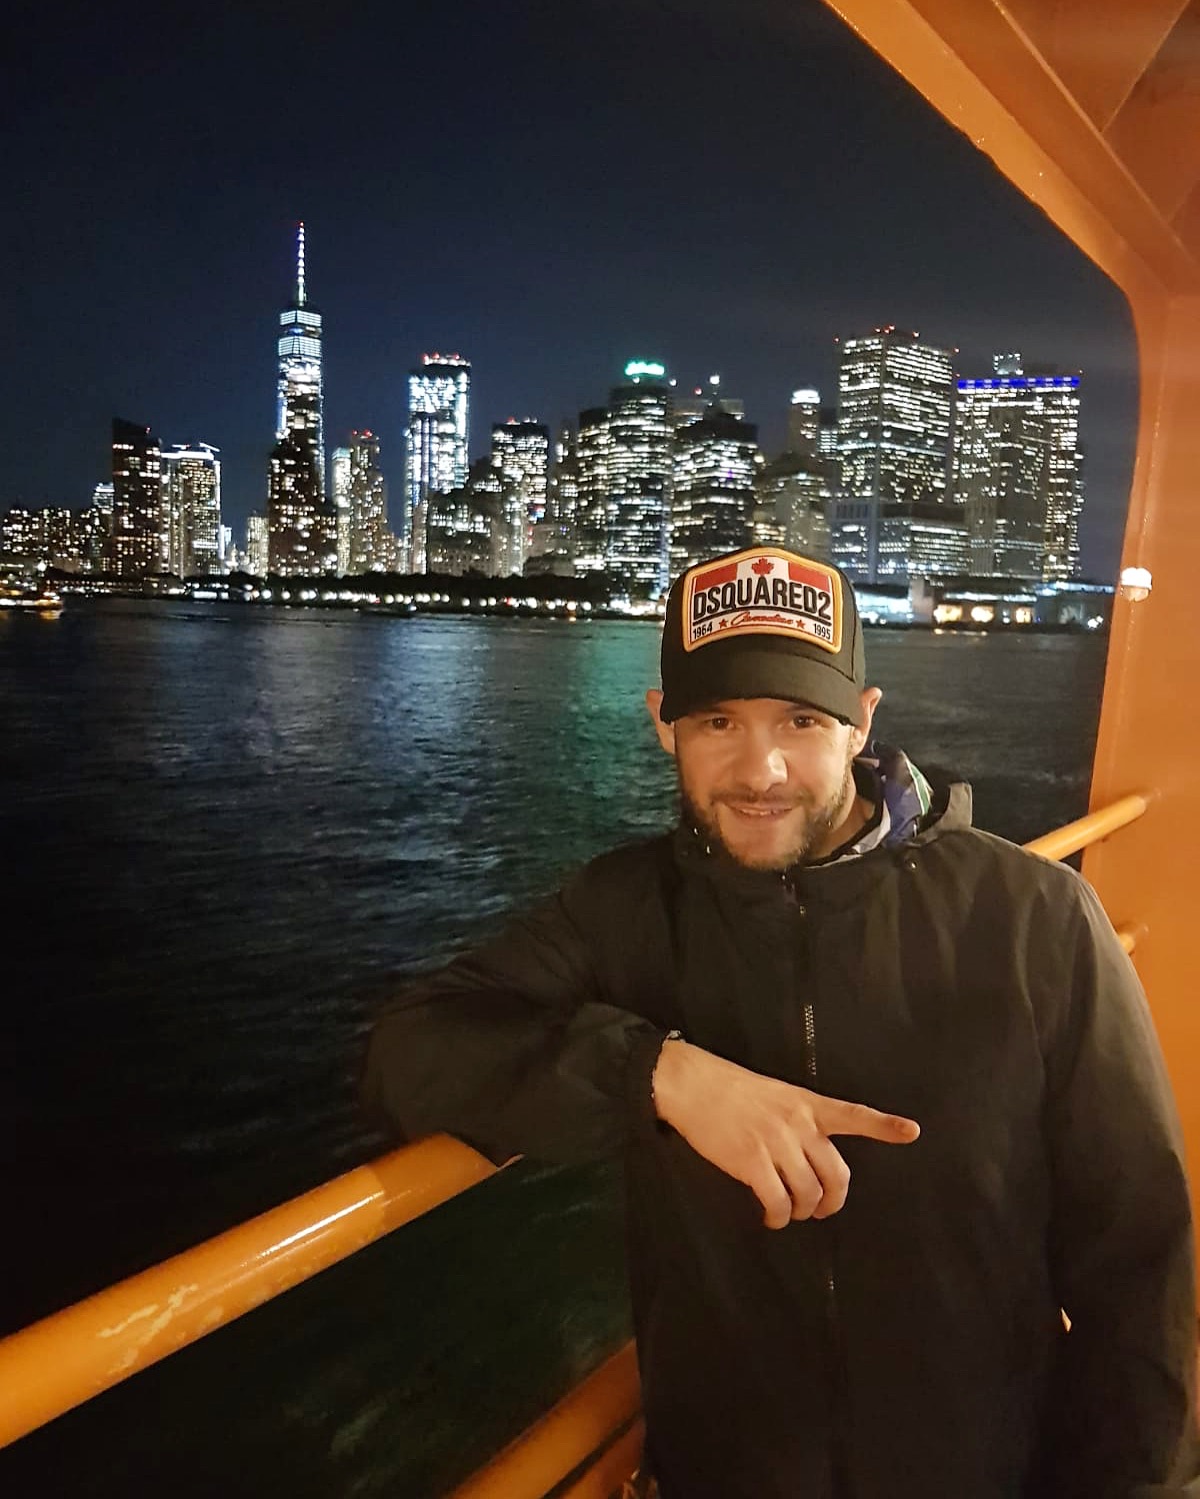 Harry Shotta standing on boat with New York behind him.